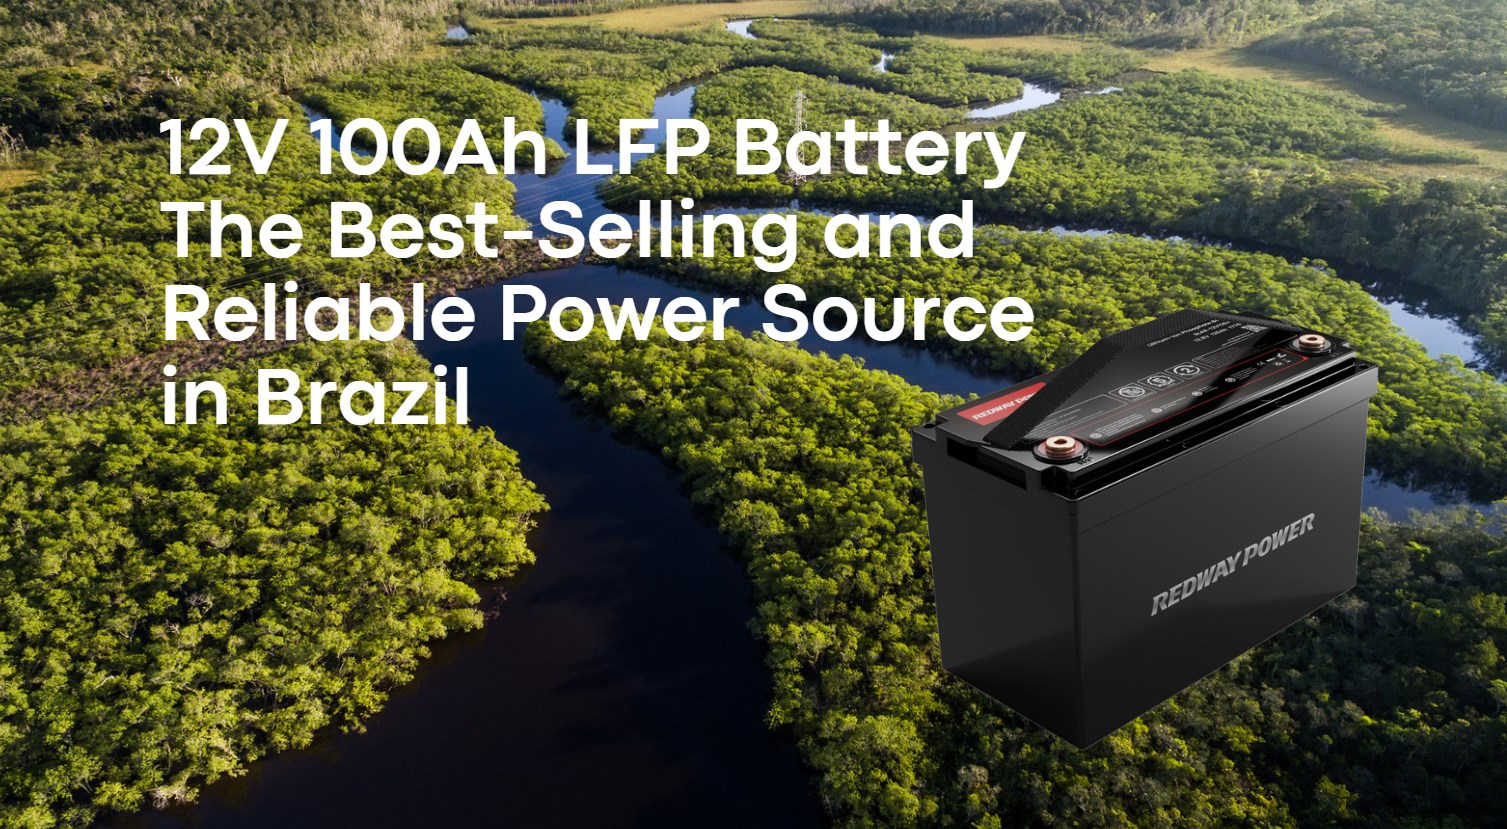 12V 100Ah Lithium Iron Phosphate Battery: The Best-Selling and Reliable Power Source in Brazil